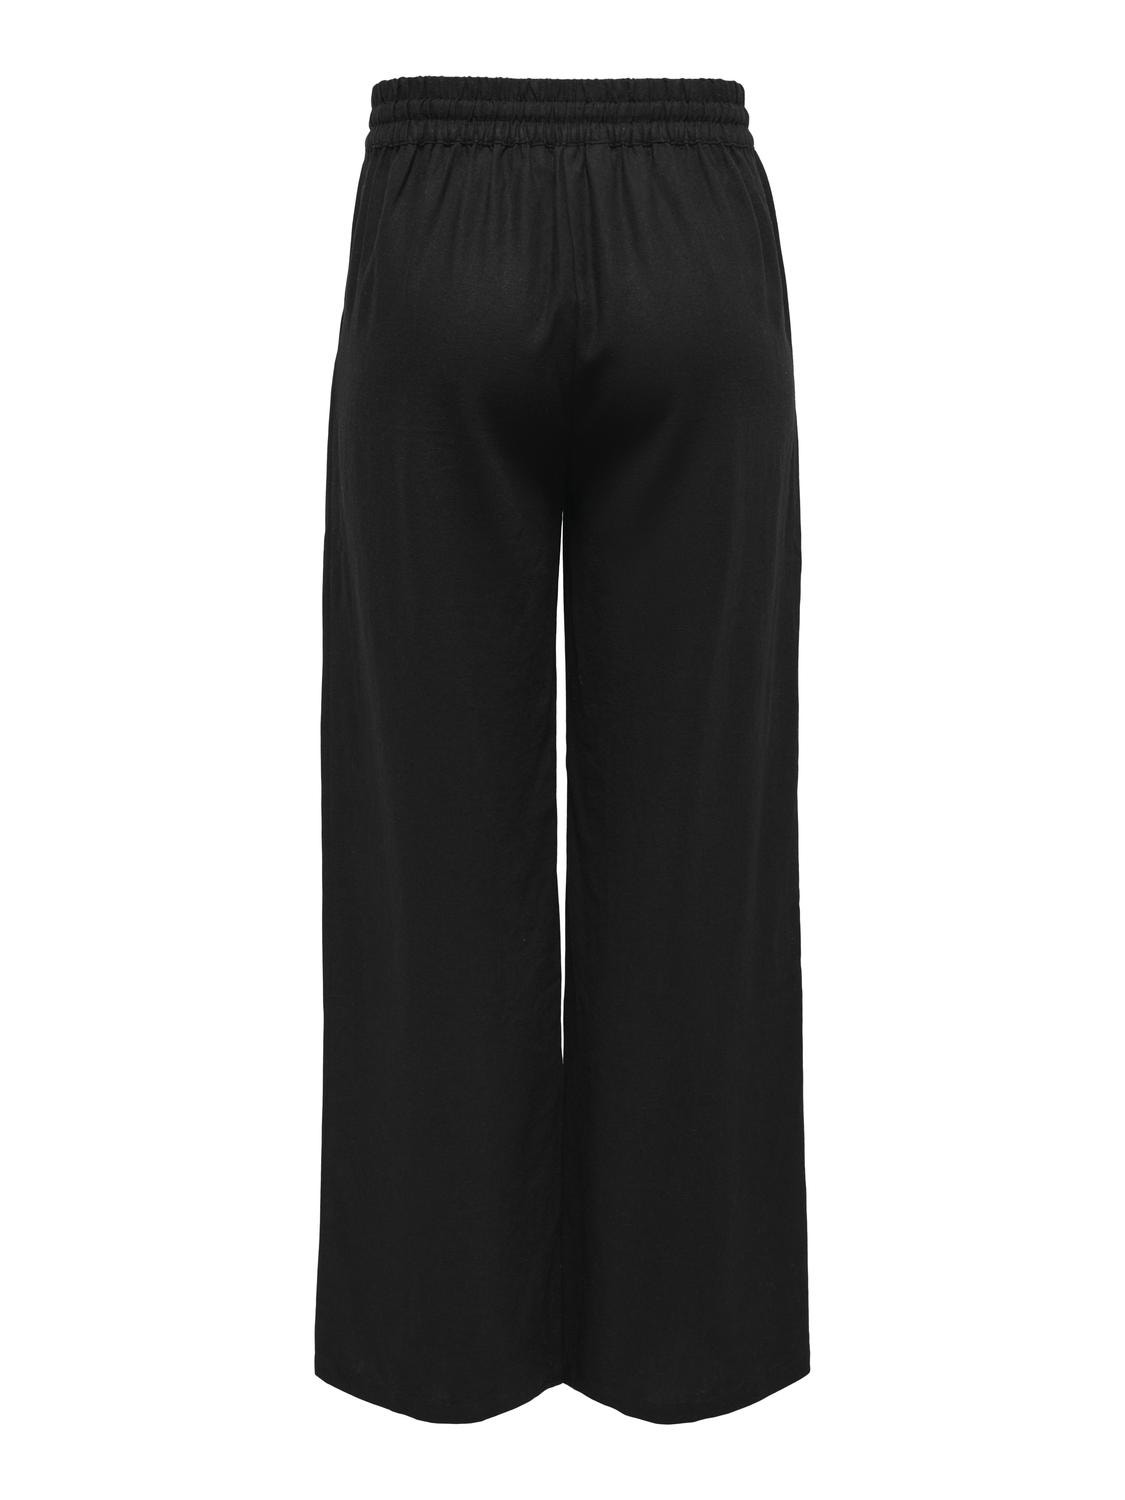 ONLY Loose Fit High waist Trousers -Black - 15318361